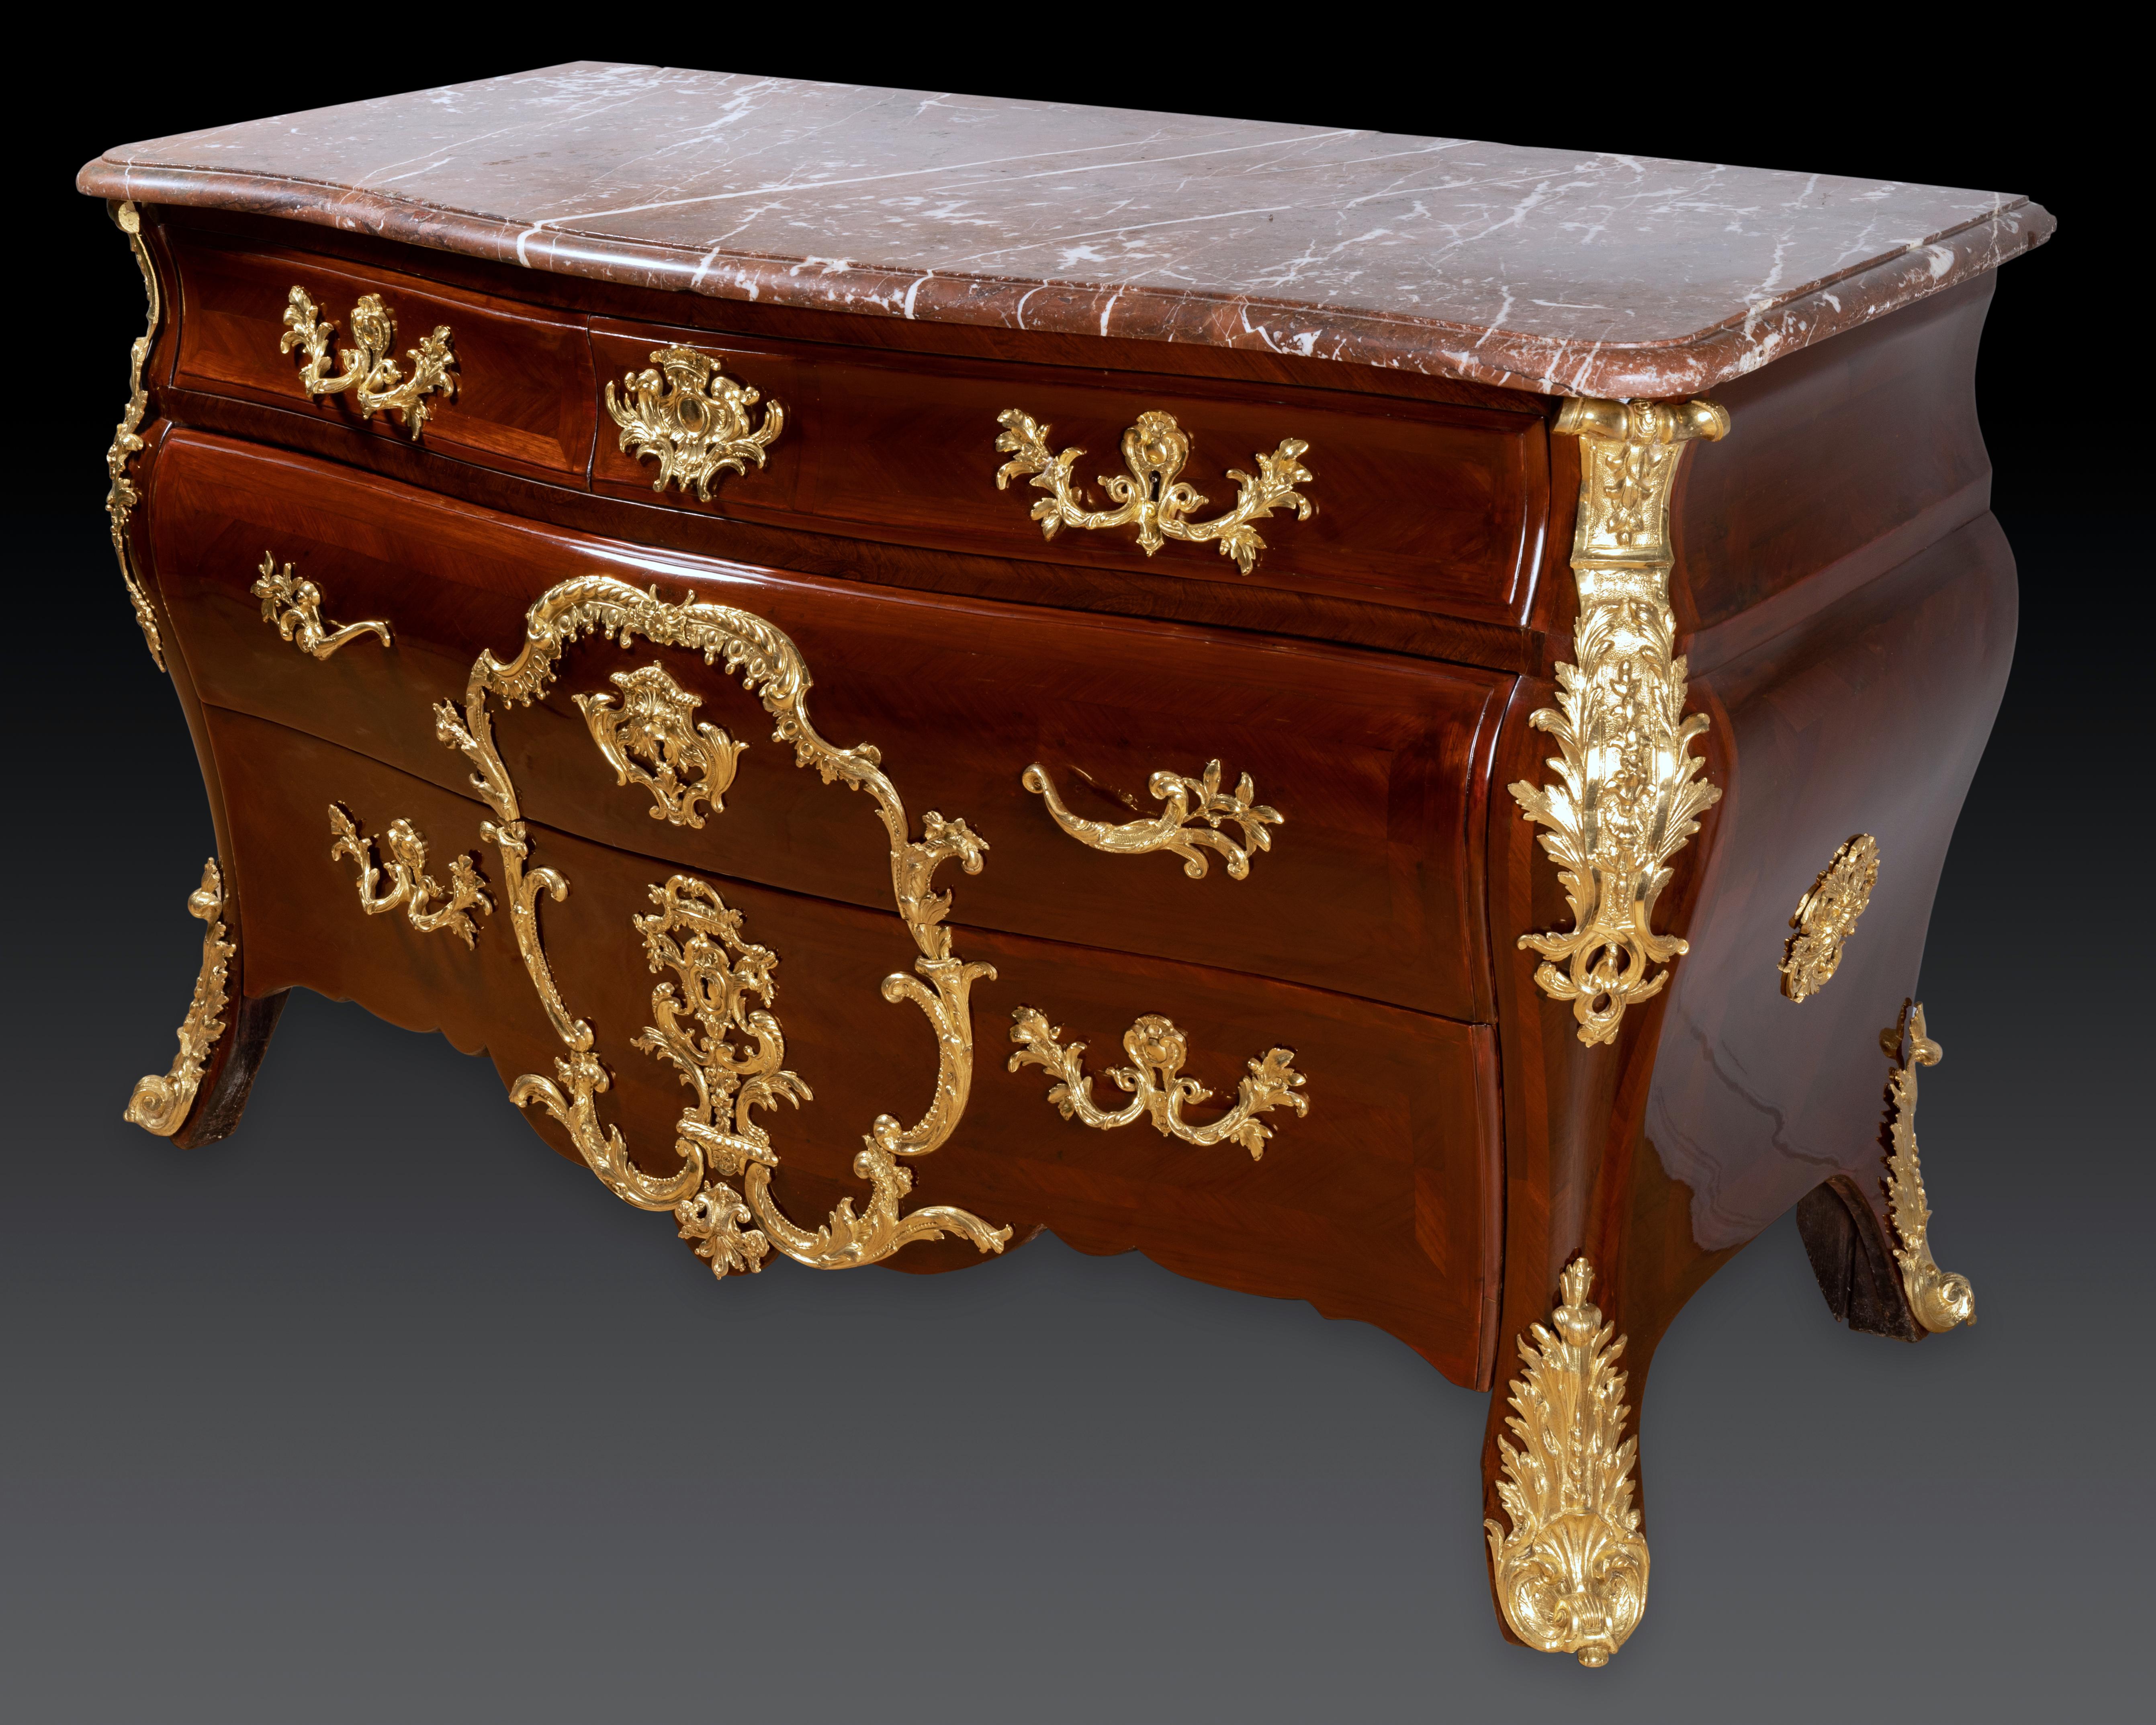 A Regence ormolu-mounted commode by Etienne Doirat (Paris, 1675-1732)
Rare and elegant commode curved on the front and on the sides, in amaranth veneer arranged in sheets in the frames. It opens with four drawers in three rows: two large and two